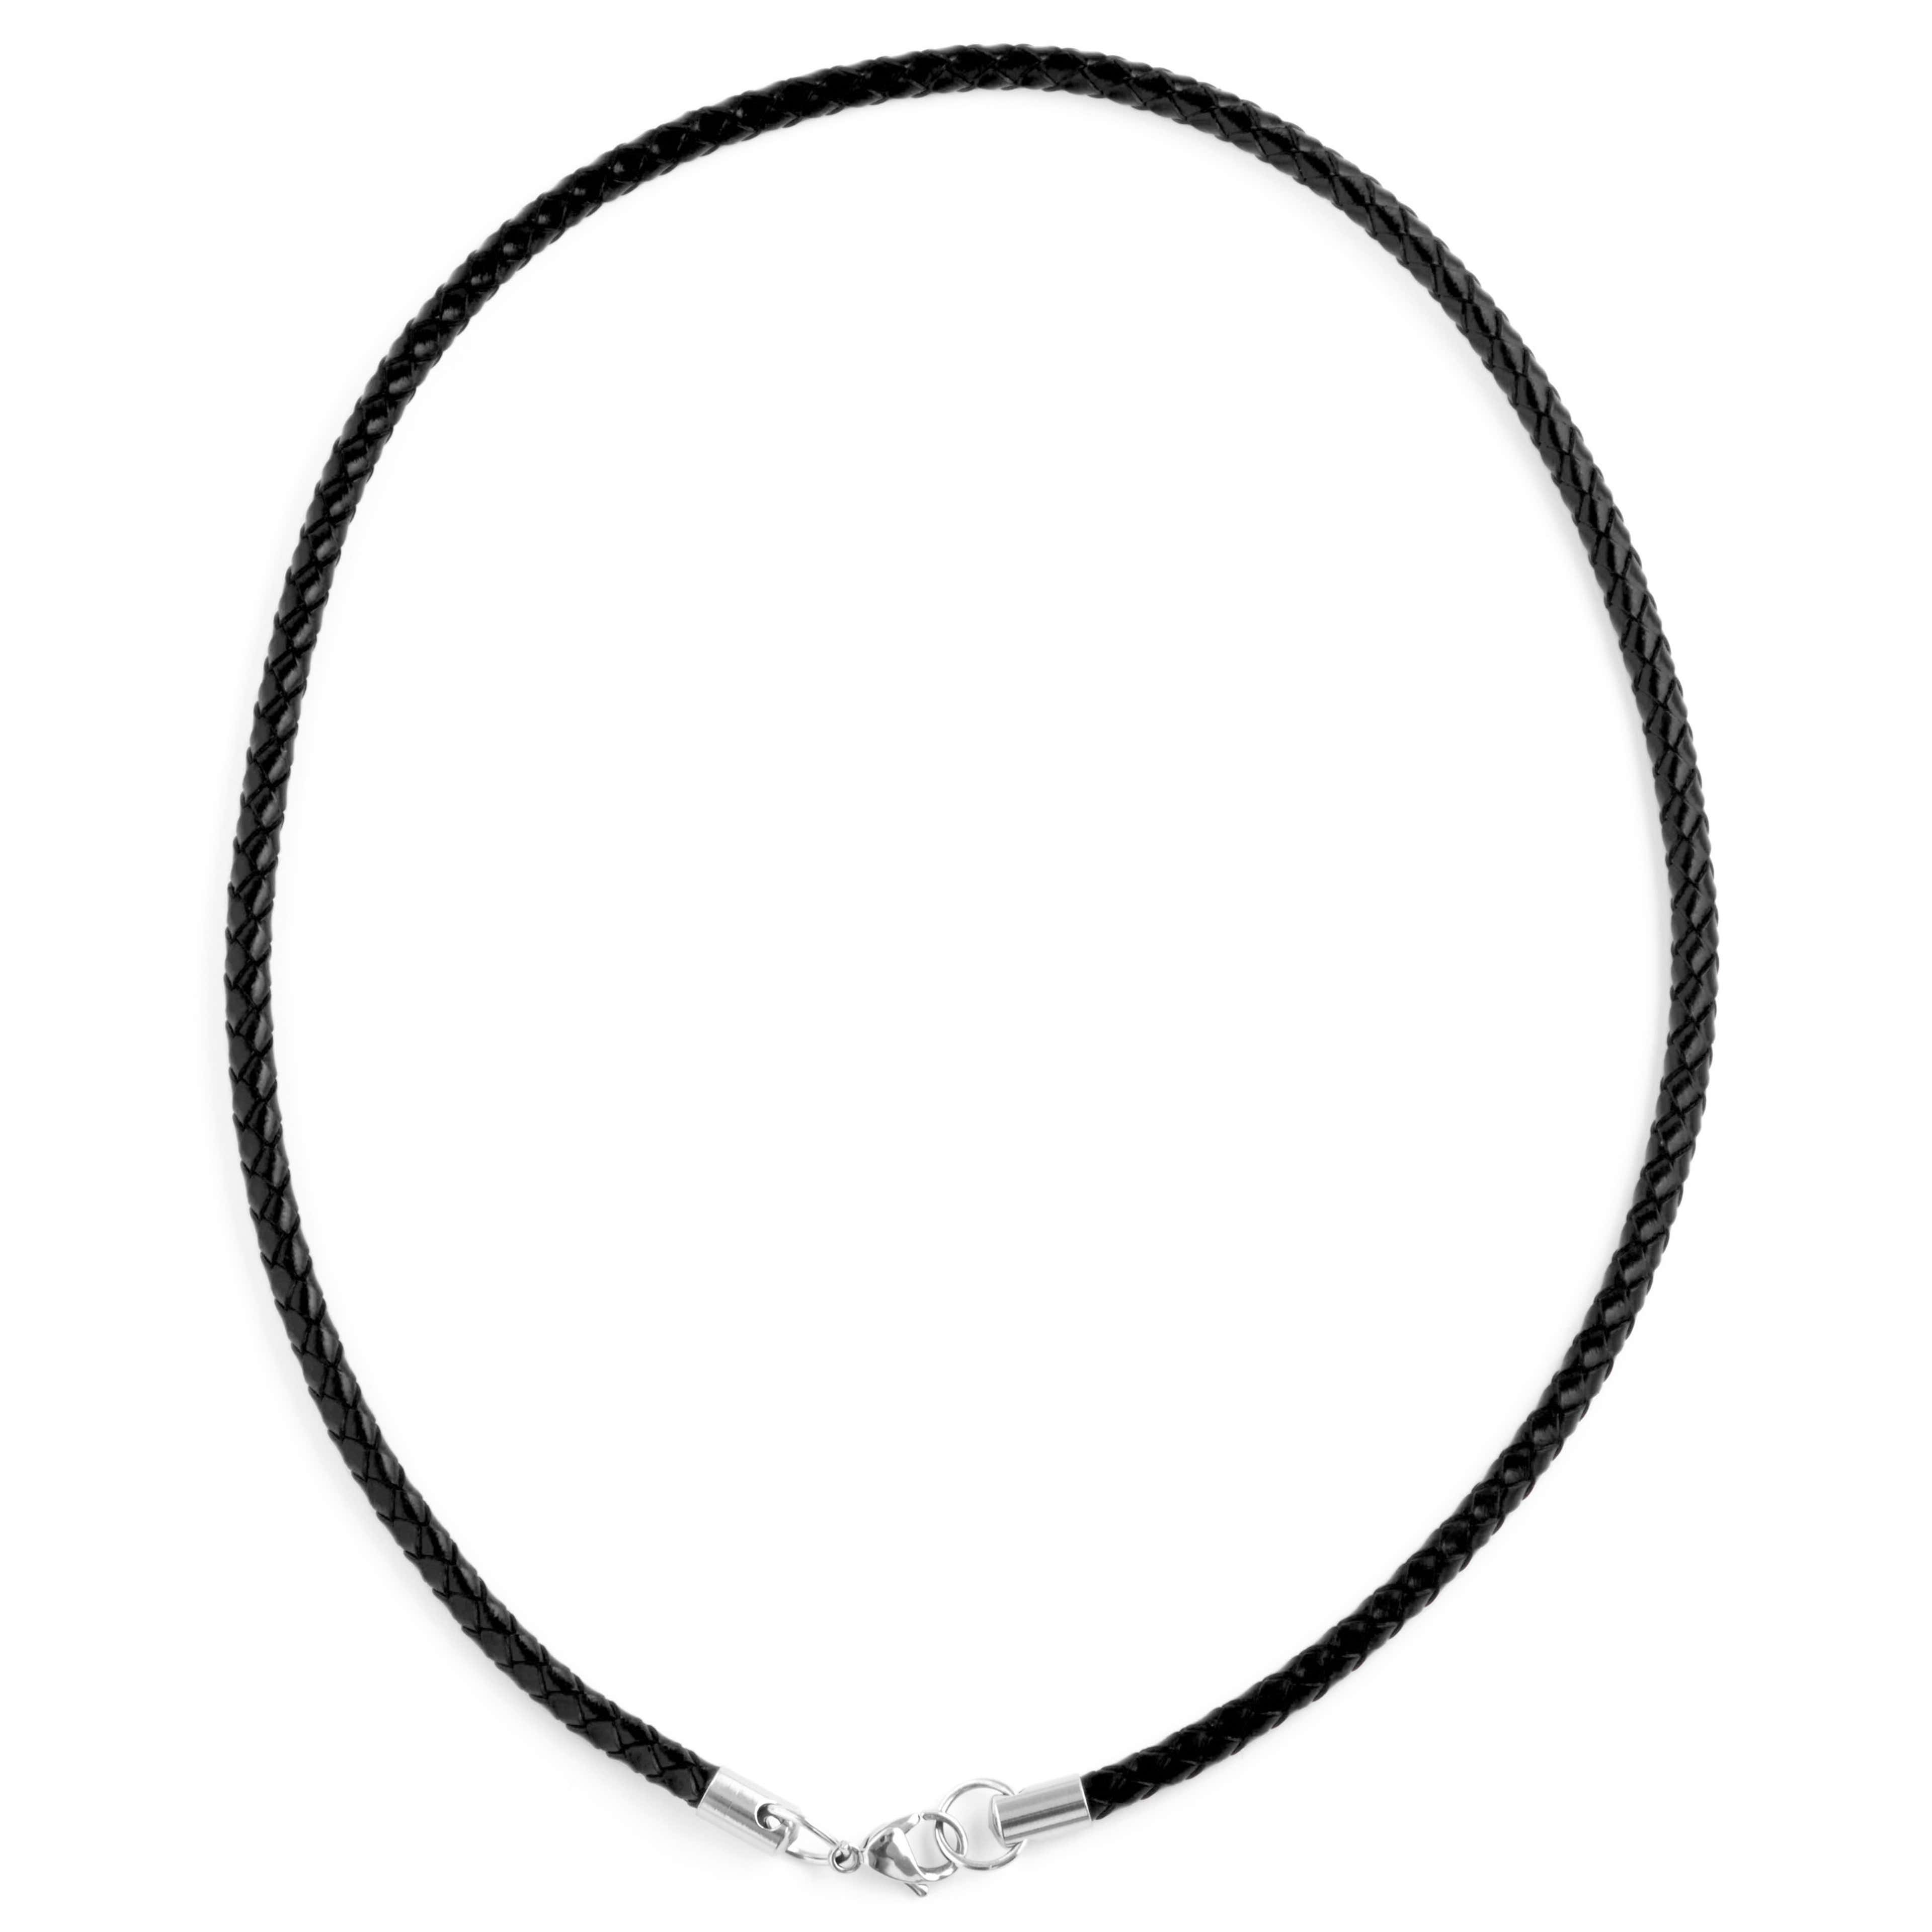 5mm Black Woven Leather necklace - 7 - gallery